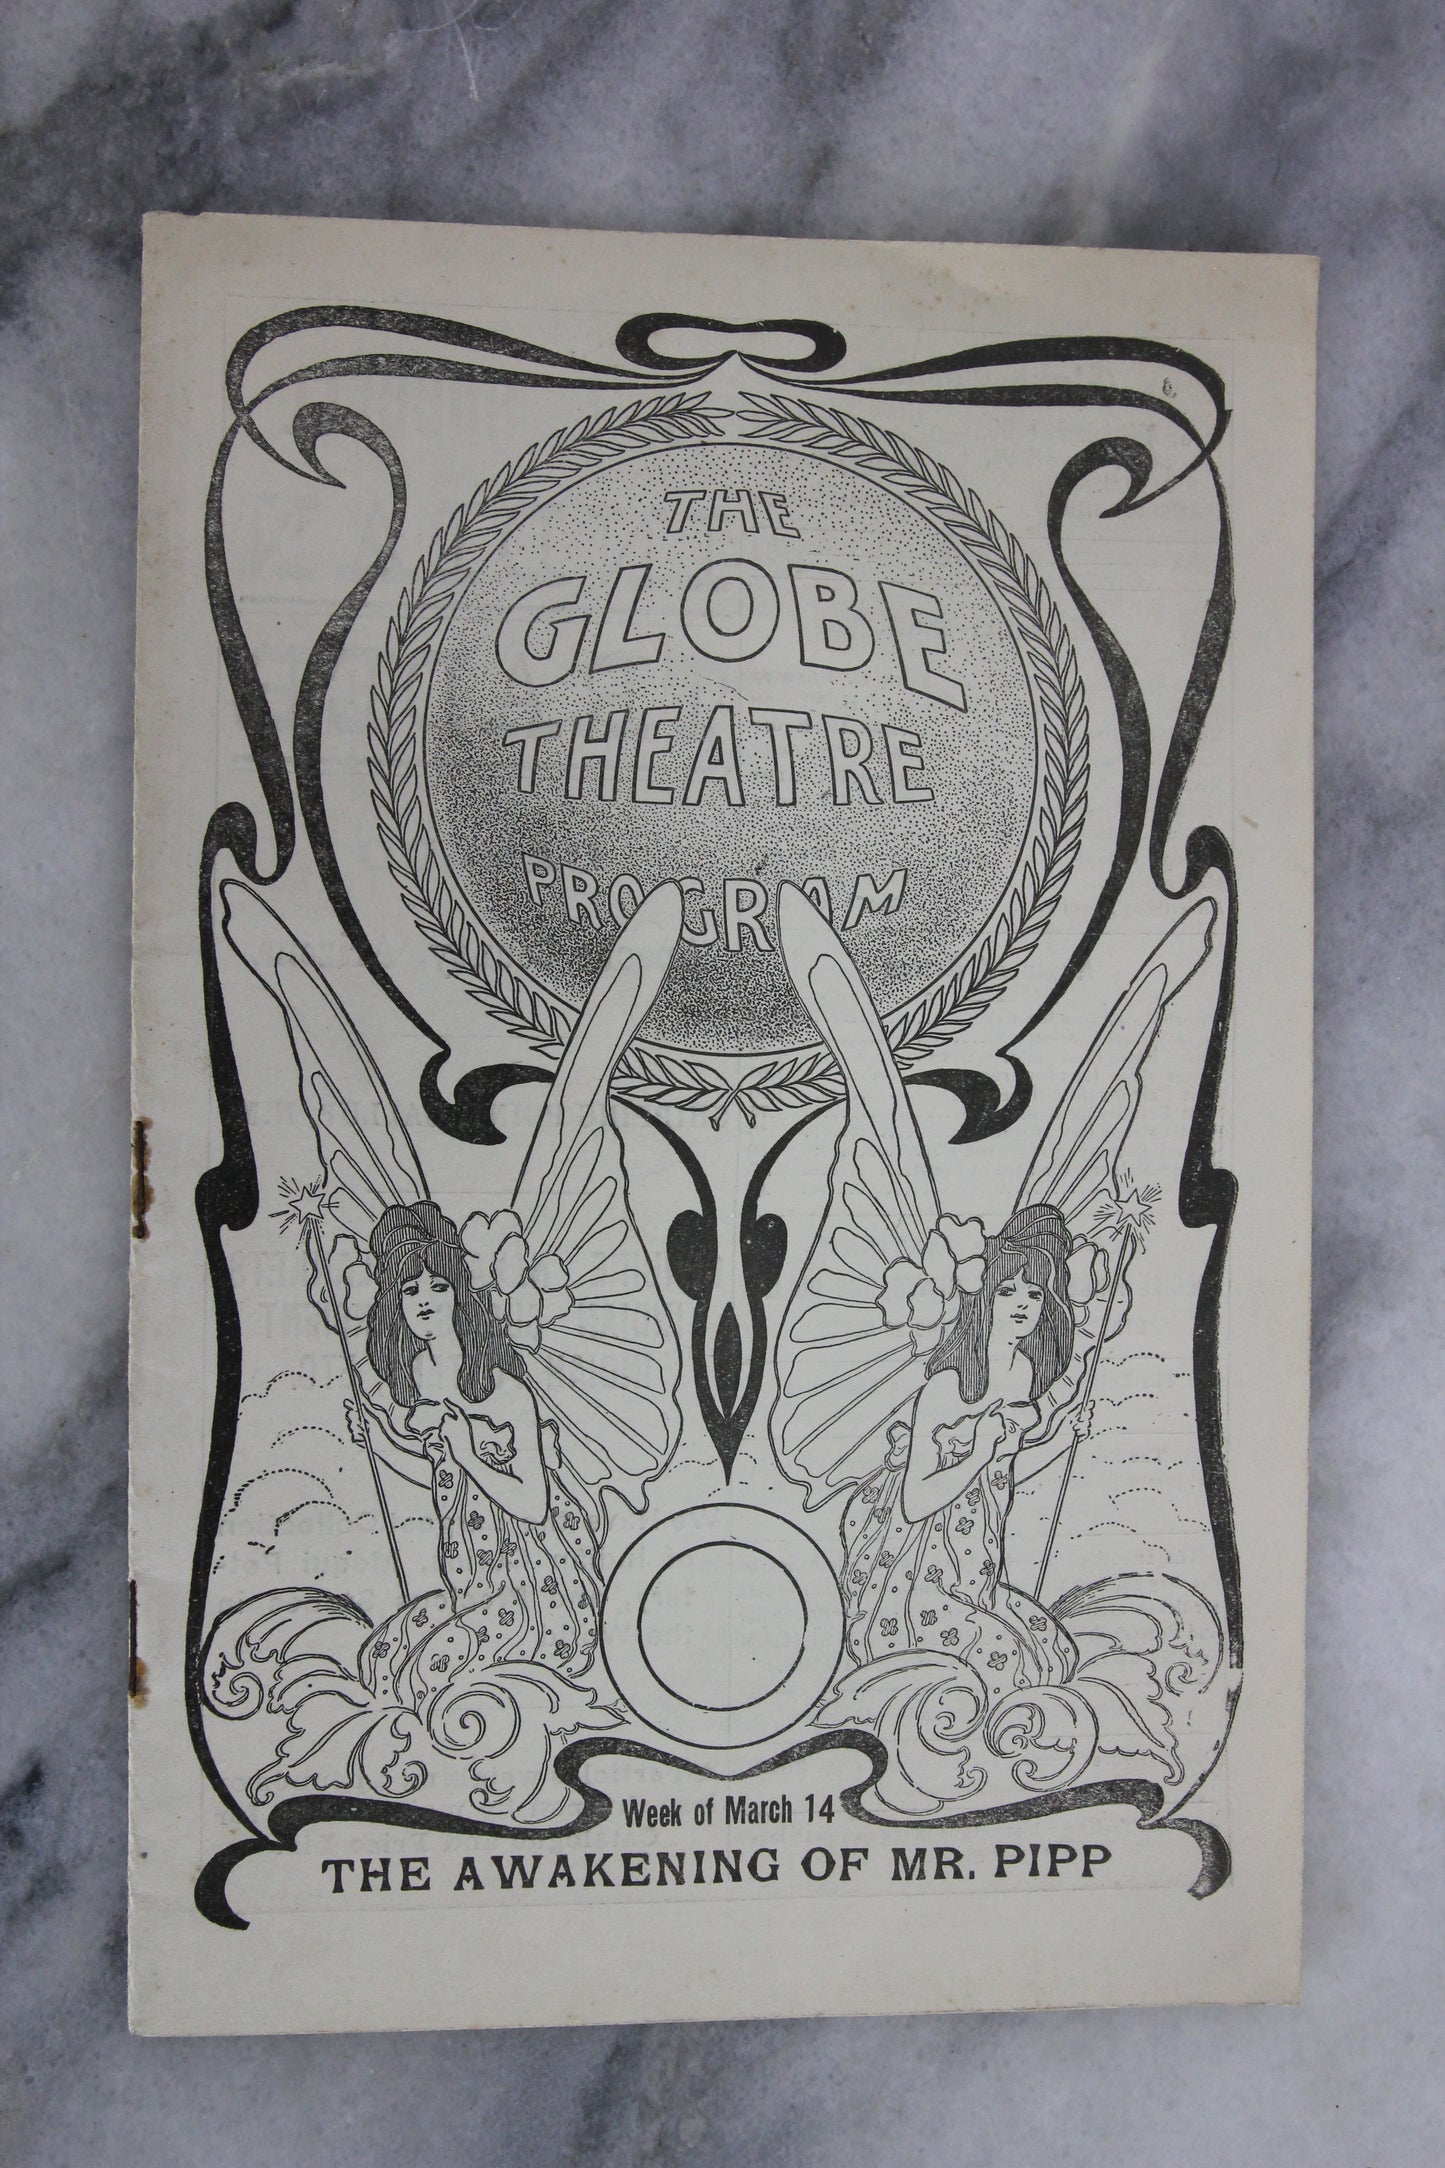 Antique Playbill from The Globe Theatre, Boston, Week of March 14, 1903